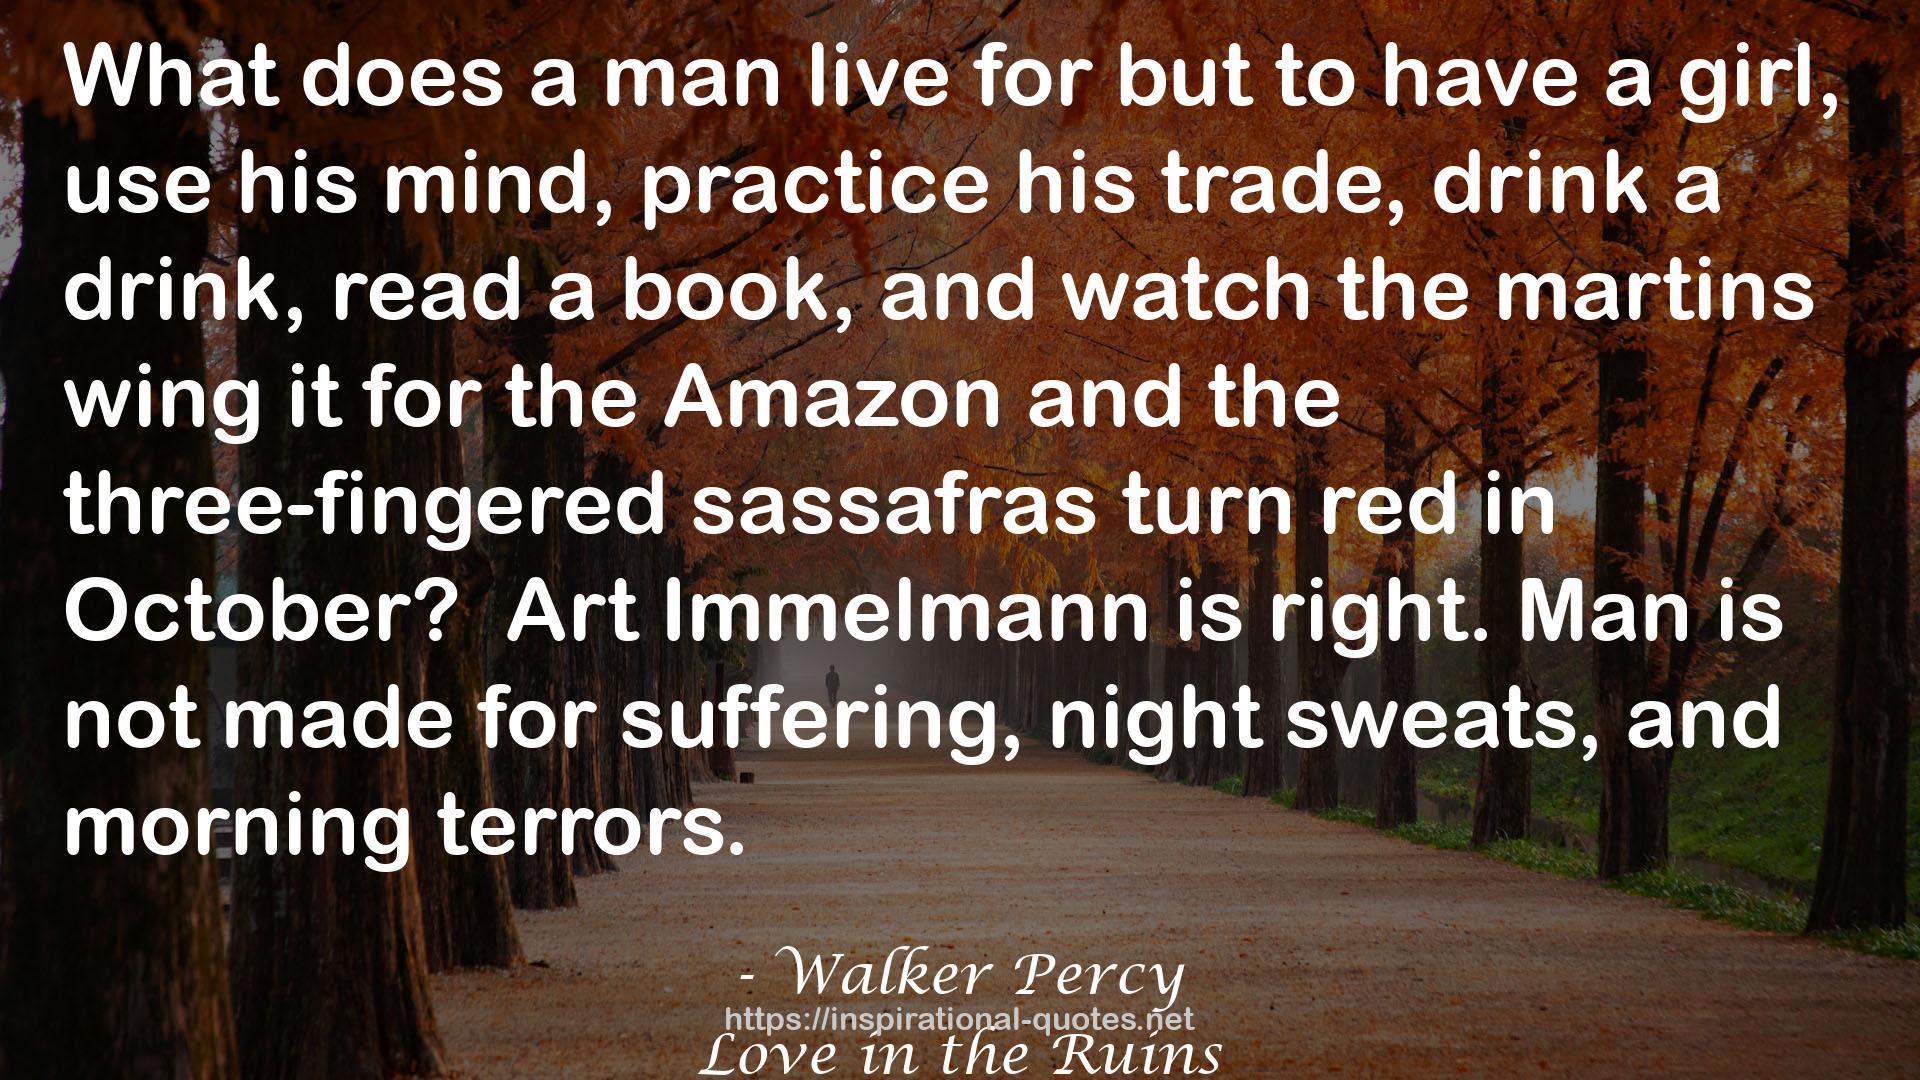 Walker Percy QUOTES